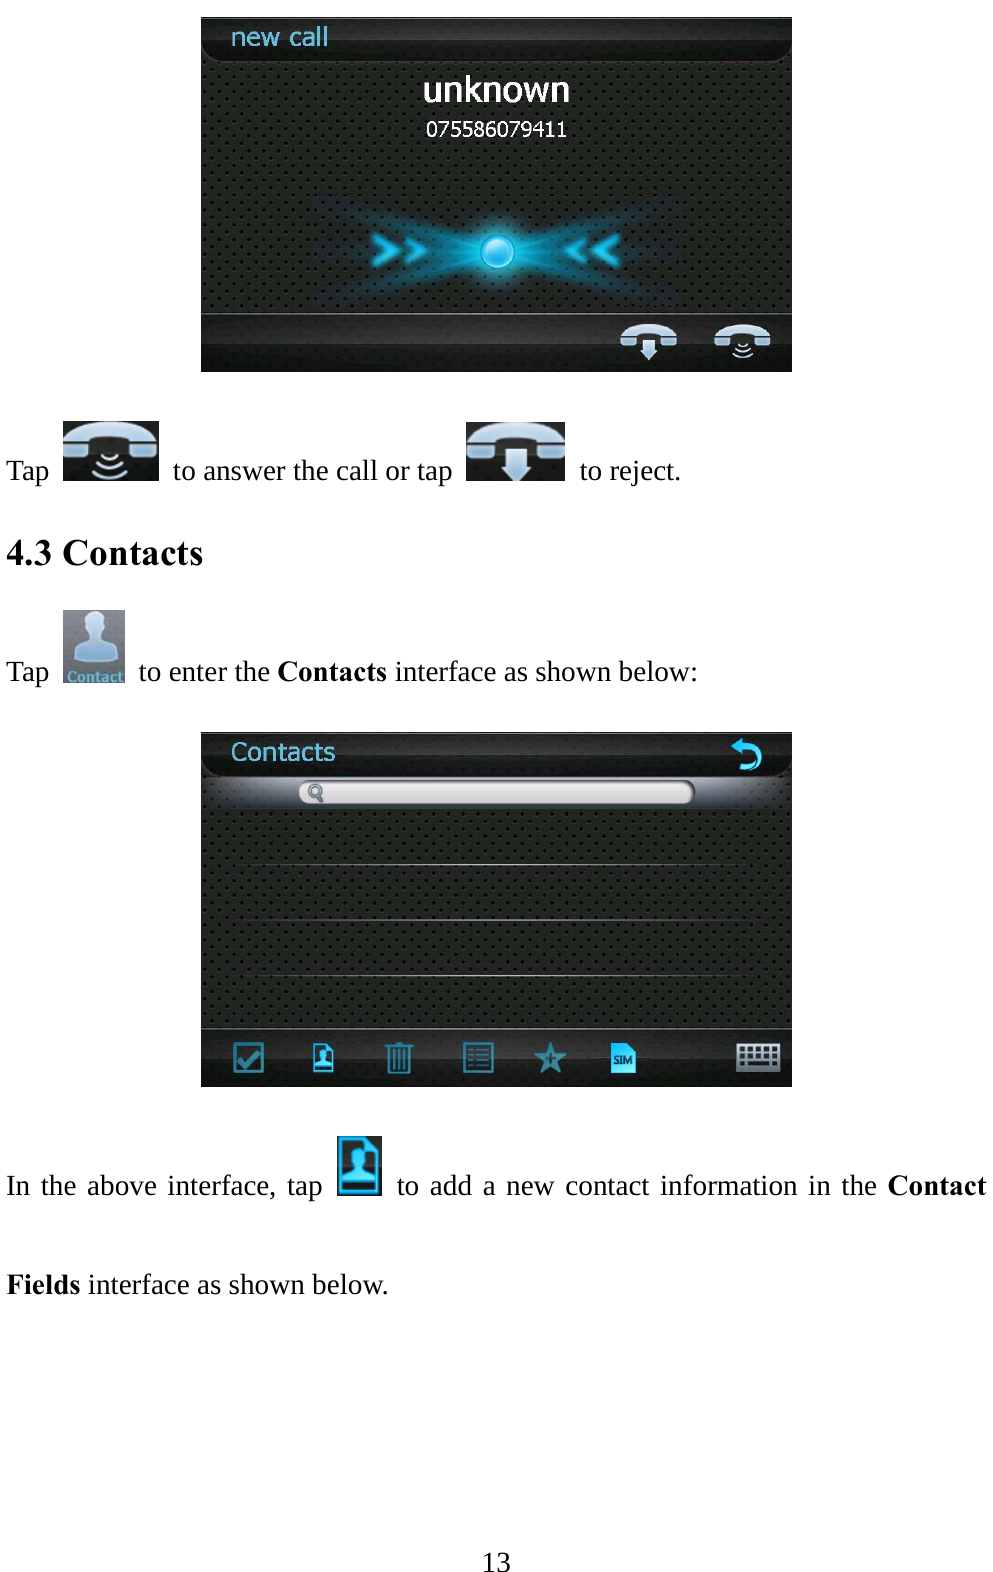  13  Tap    to answer the call or tap   to reject. 4.3 Contacts Tap    to enter the Contacts interface as shown below:  In the above interface, tap   to add a new contact information in the Contact Fields interface as shown below. 